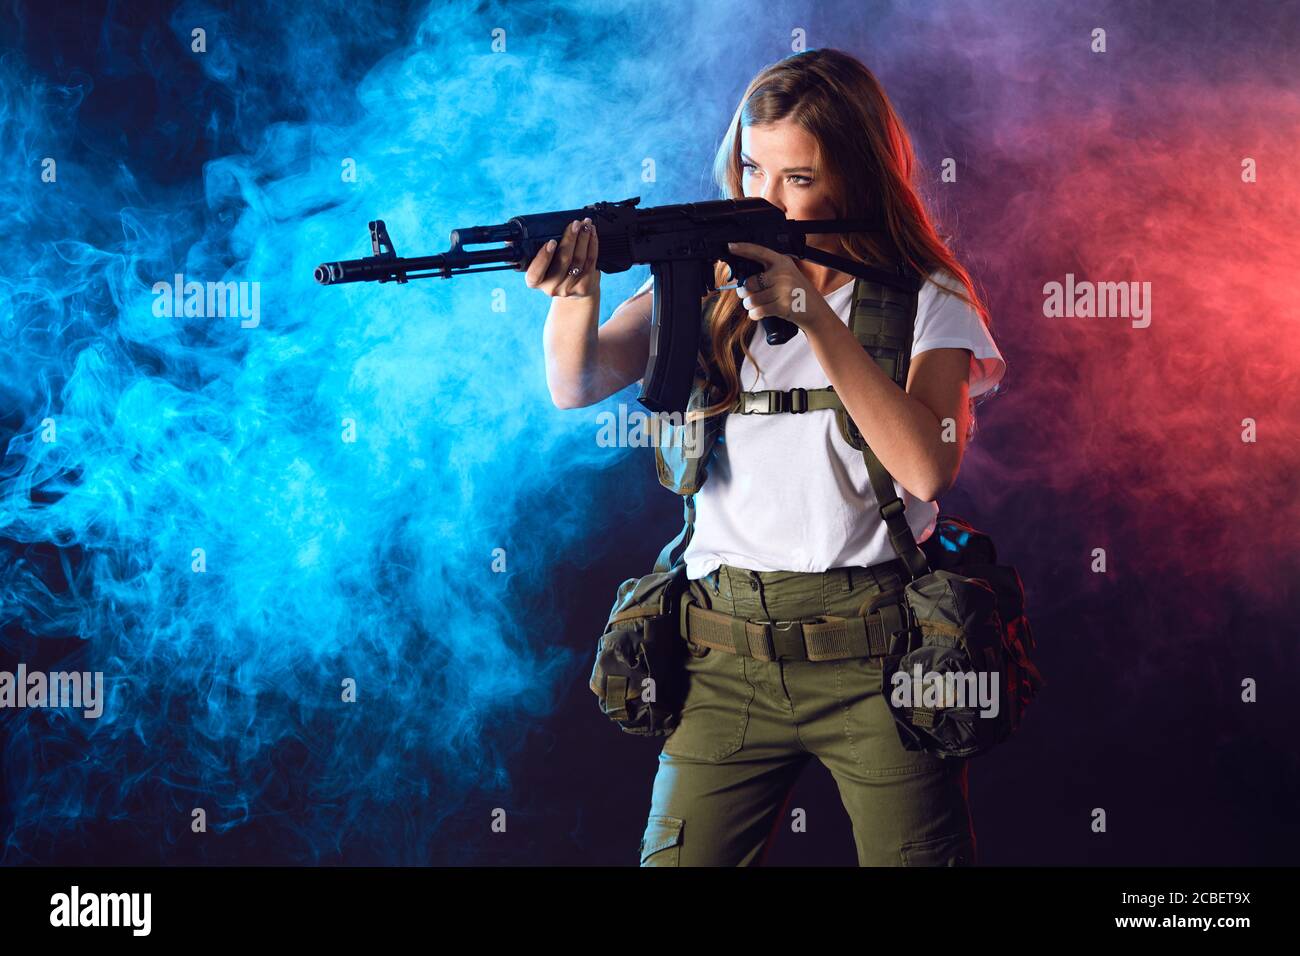 woman sniper with SVD sniper rifle. Female in US Army soldier with rifle. Shot in studio over smoky red and blue dual color baclground imitating explo Stock Photo